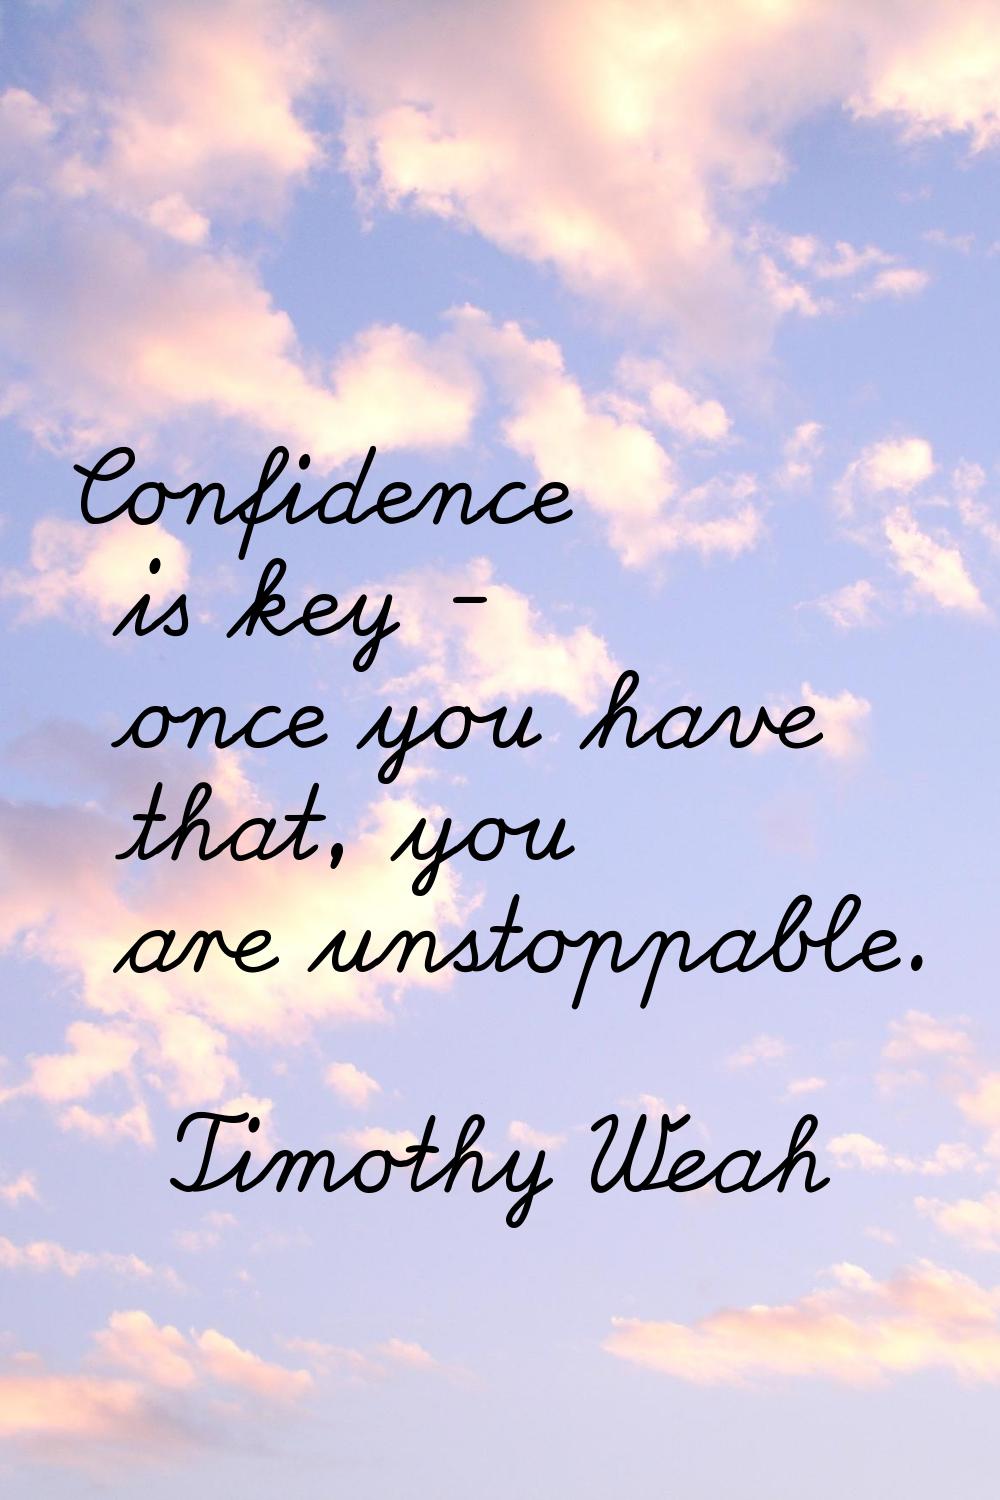 Confidence is key - once you have that, you are unstoppable.